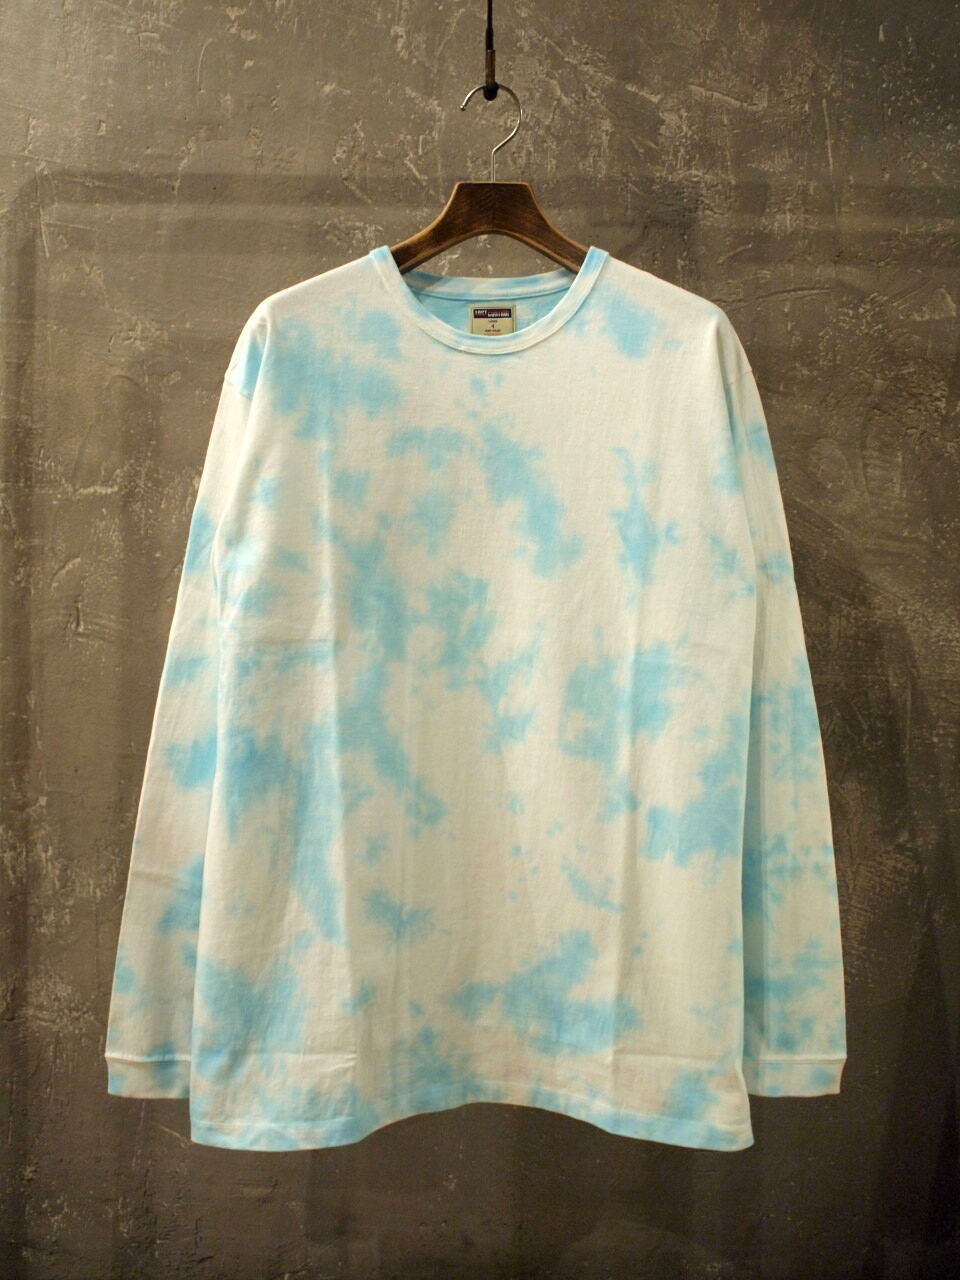 【LOST CONTROL】 Uneven Dyeing LS TEE